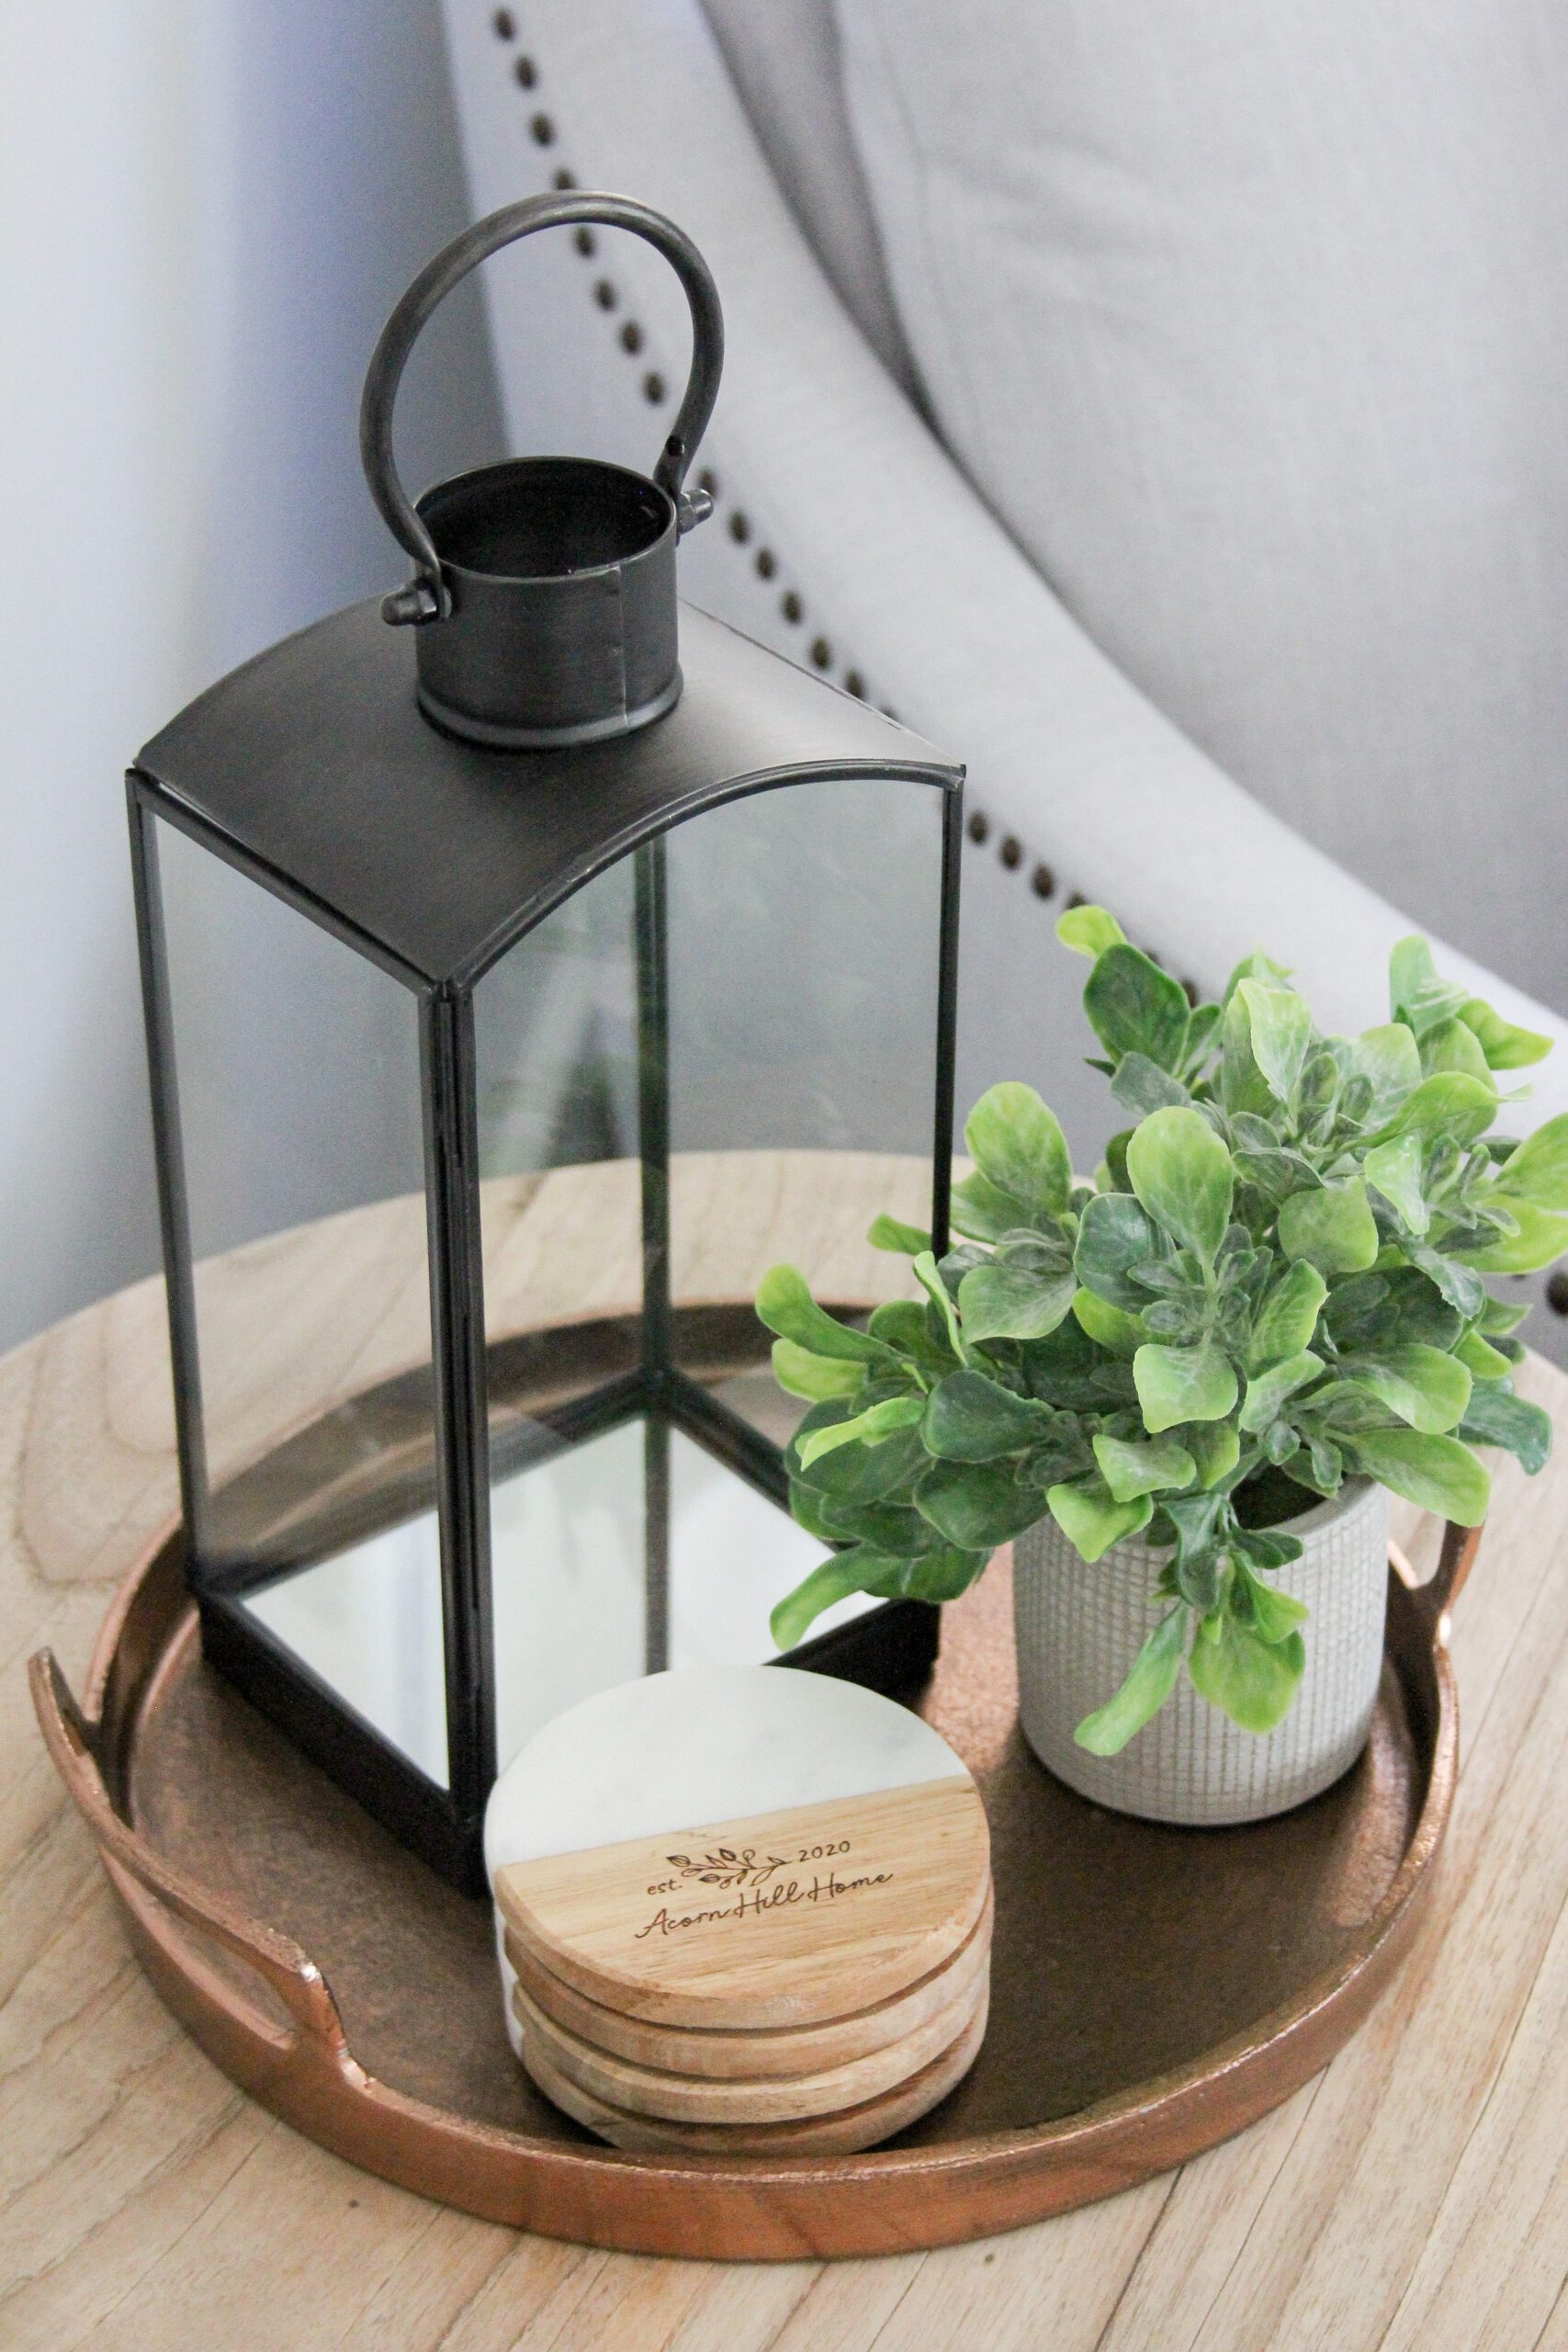 black glass lantern with eucalyptus plant and wooden coasters